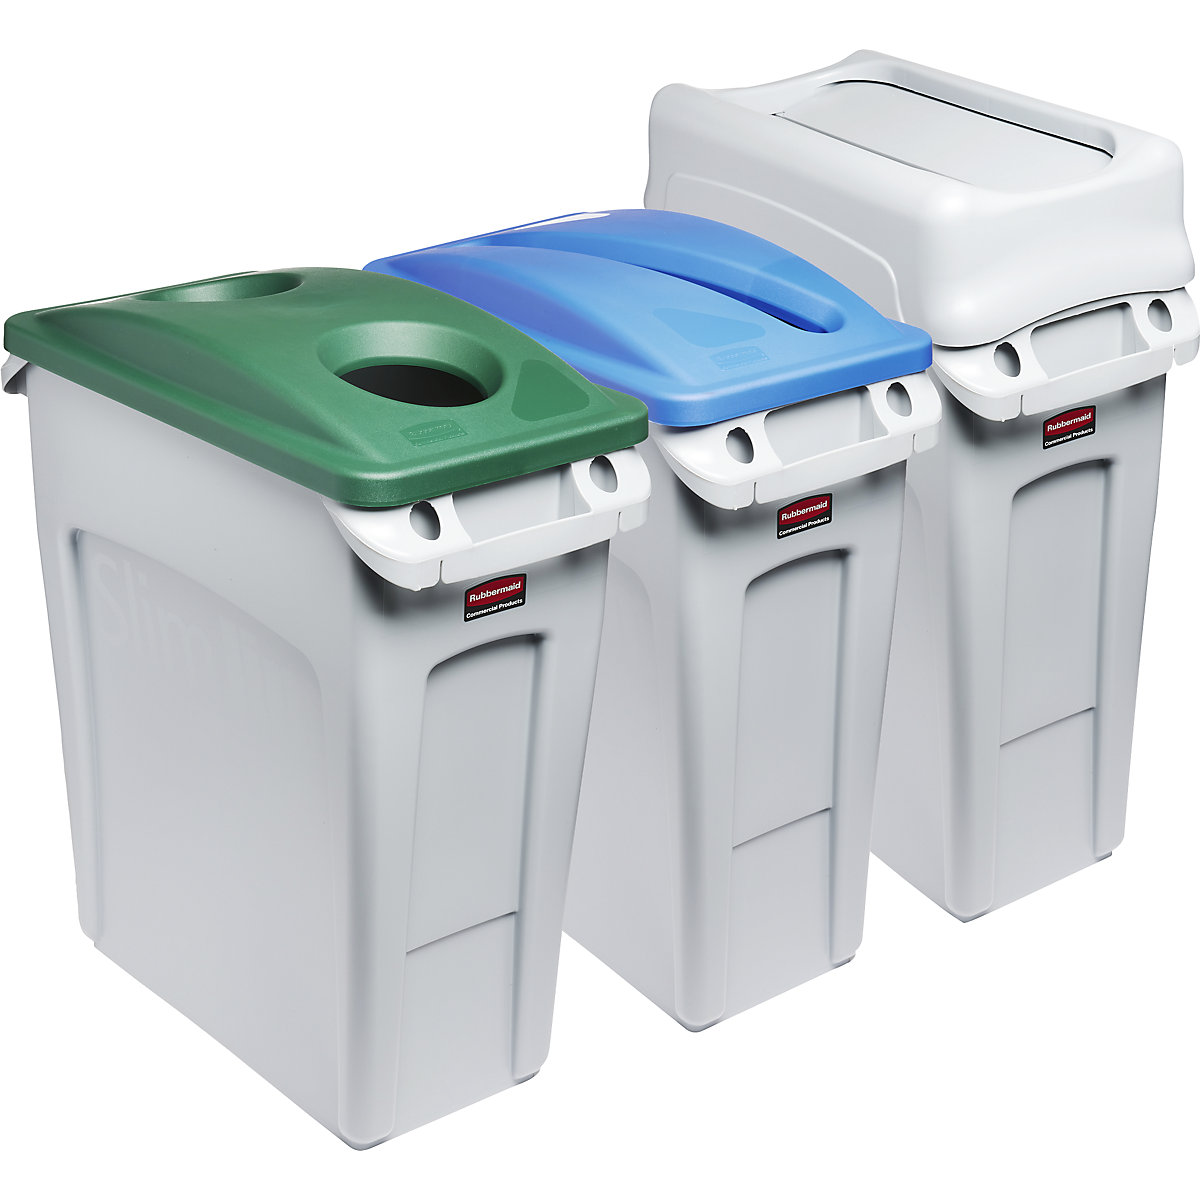 SLIM JIM® recyclable waste collection station, set of 3 - Rubbermaid